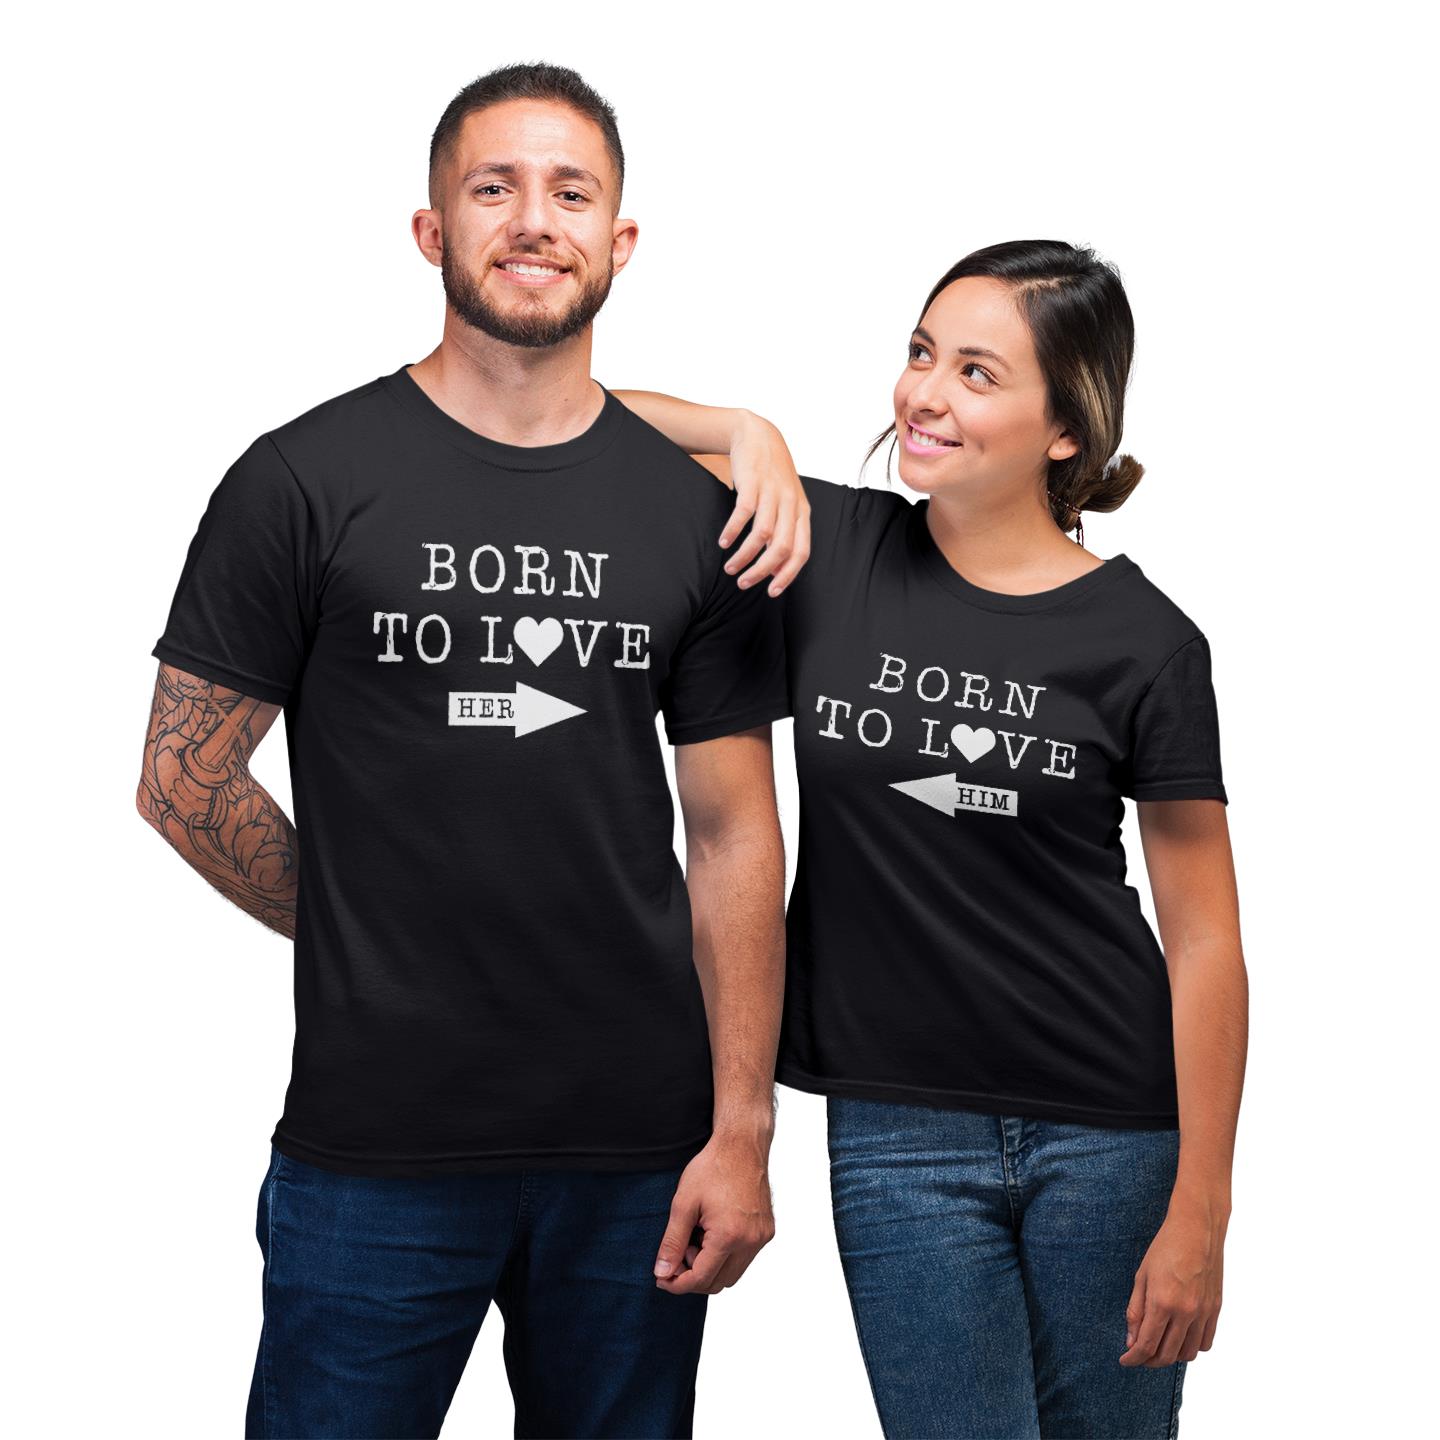 Born To Love Shirts Born For Him Born for Her Matching Romantic Couple T-shirt